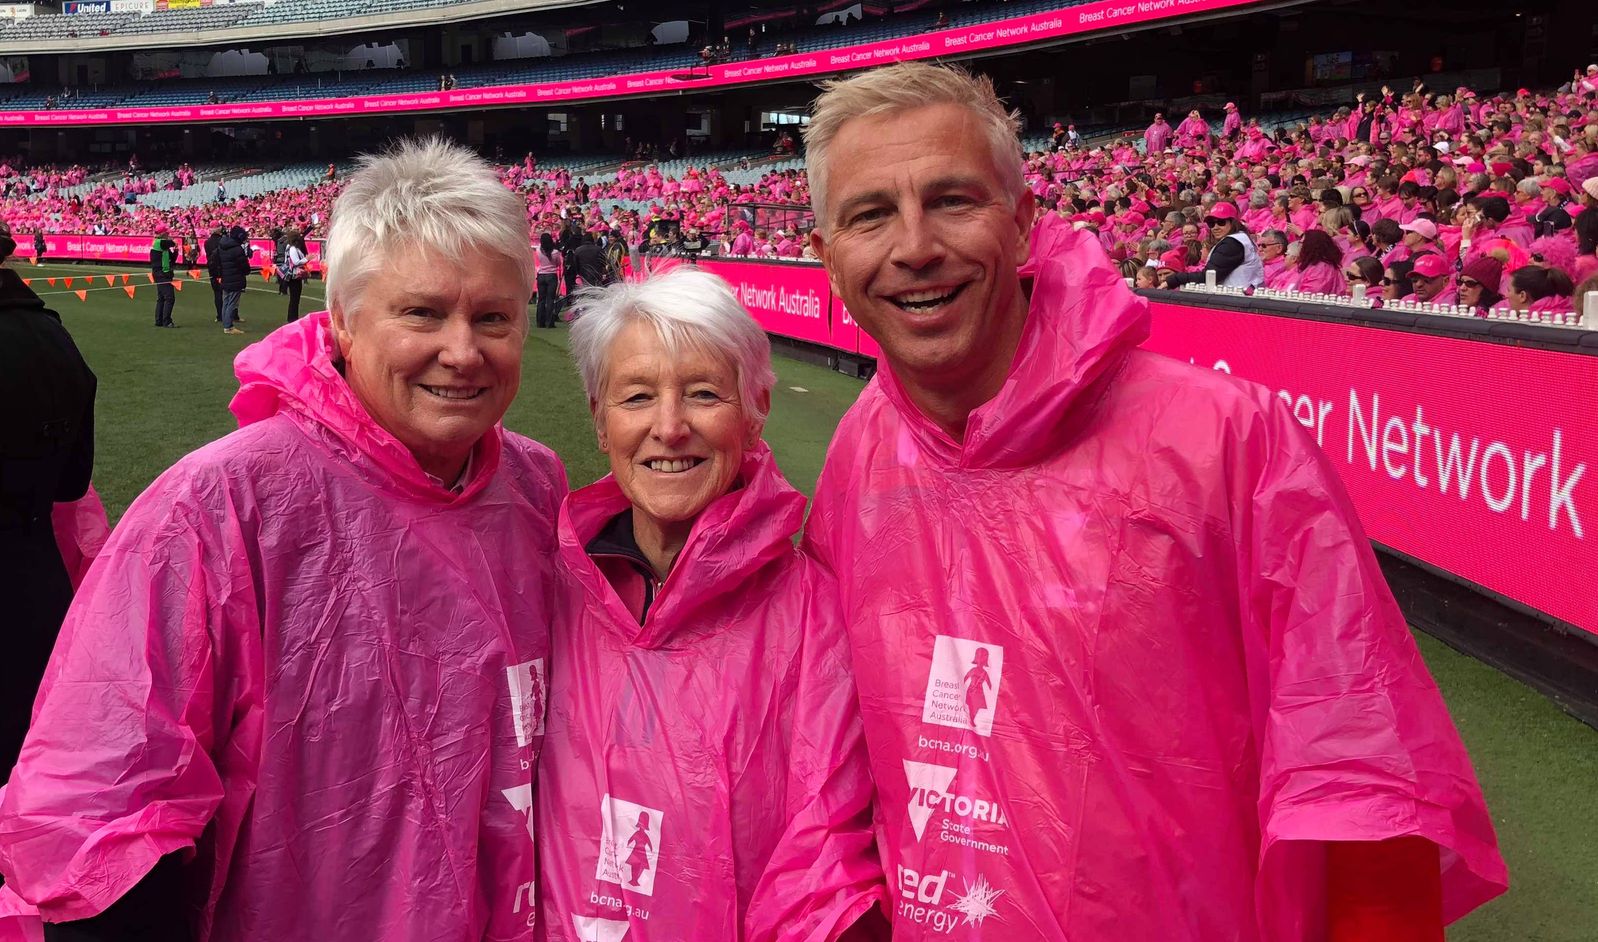 Meet the gay man standing with families affected by breast cancer in Australia